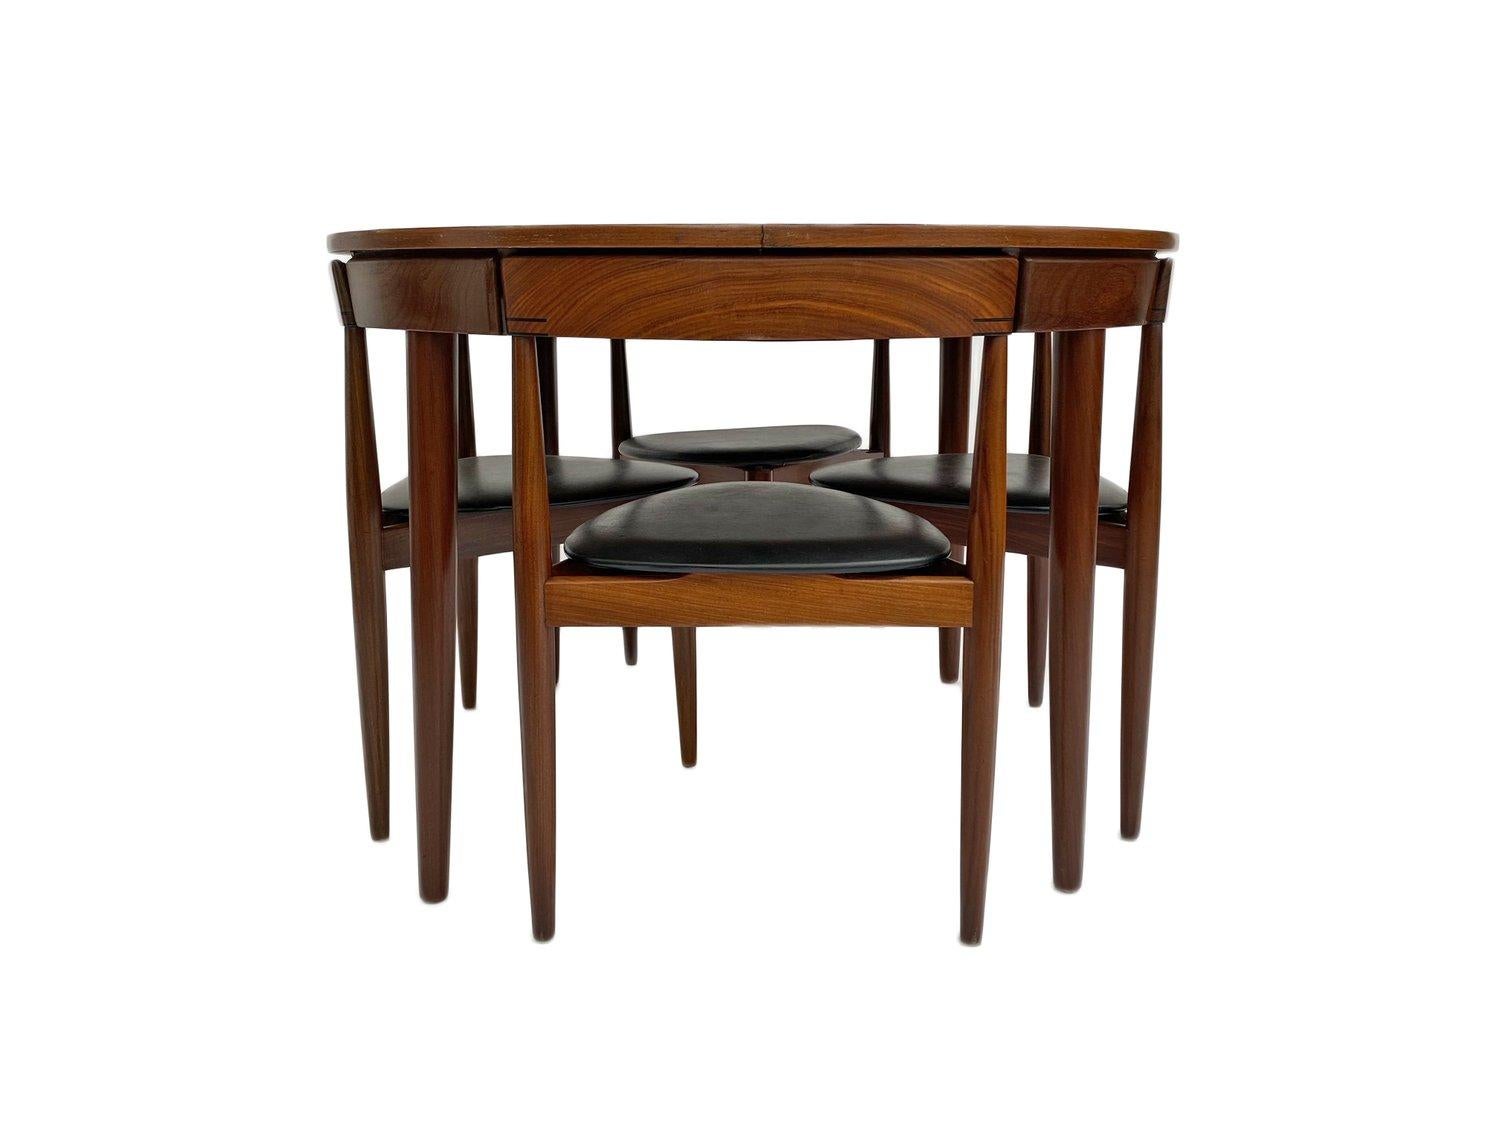 Mid-20th Century Danish Hans Olsen for Frem Røjle 'Roundette' Series Teak Dining Table and Chairs